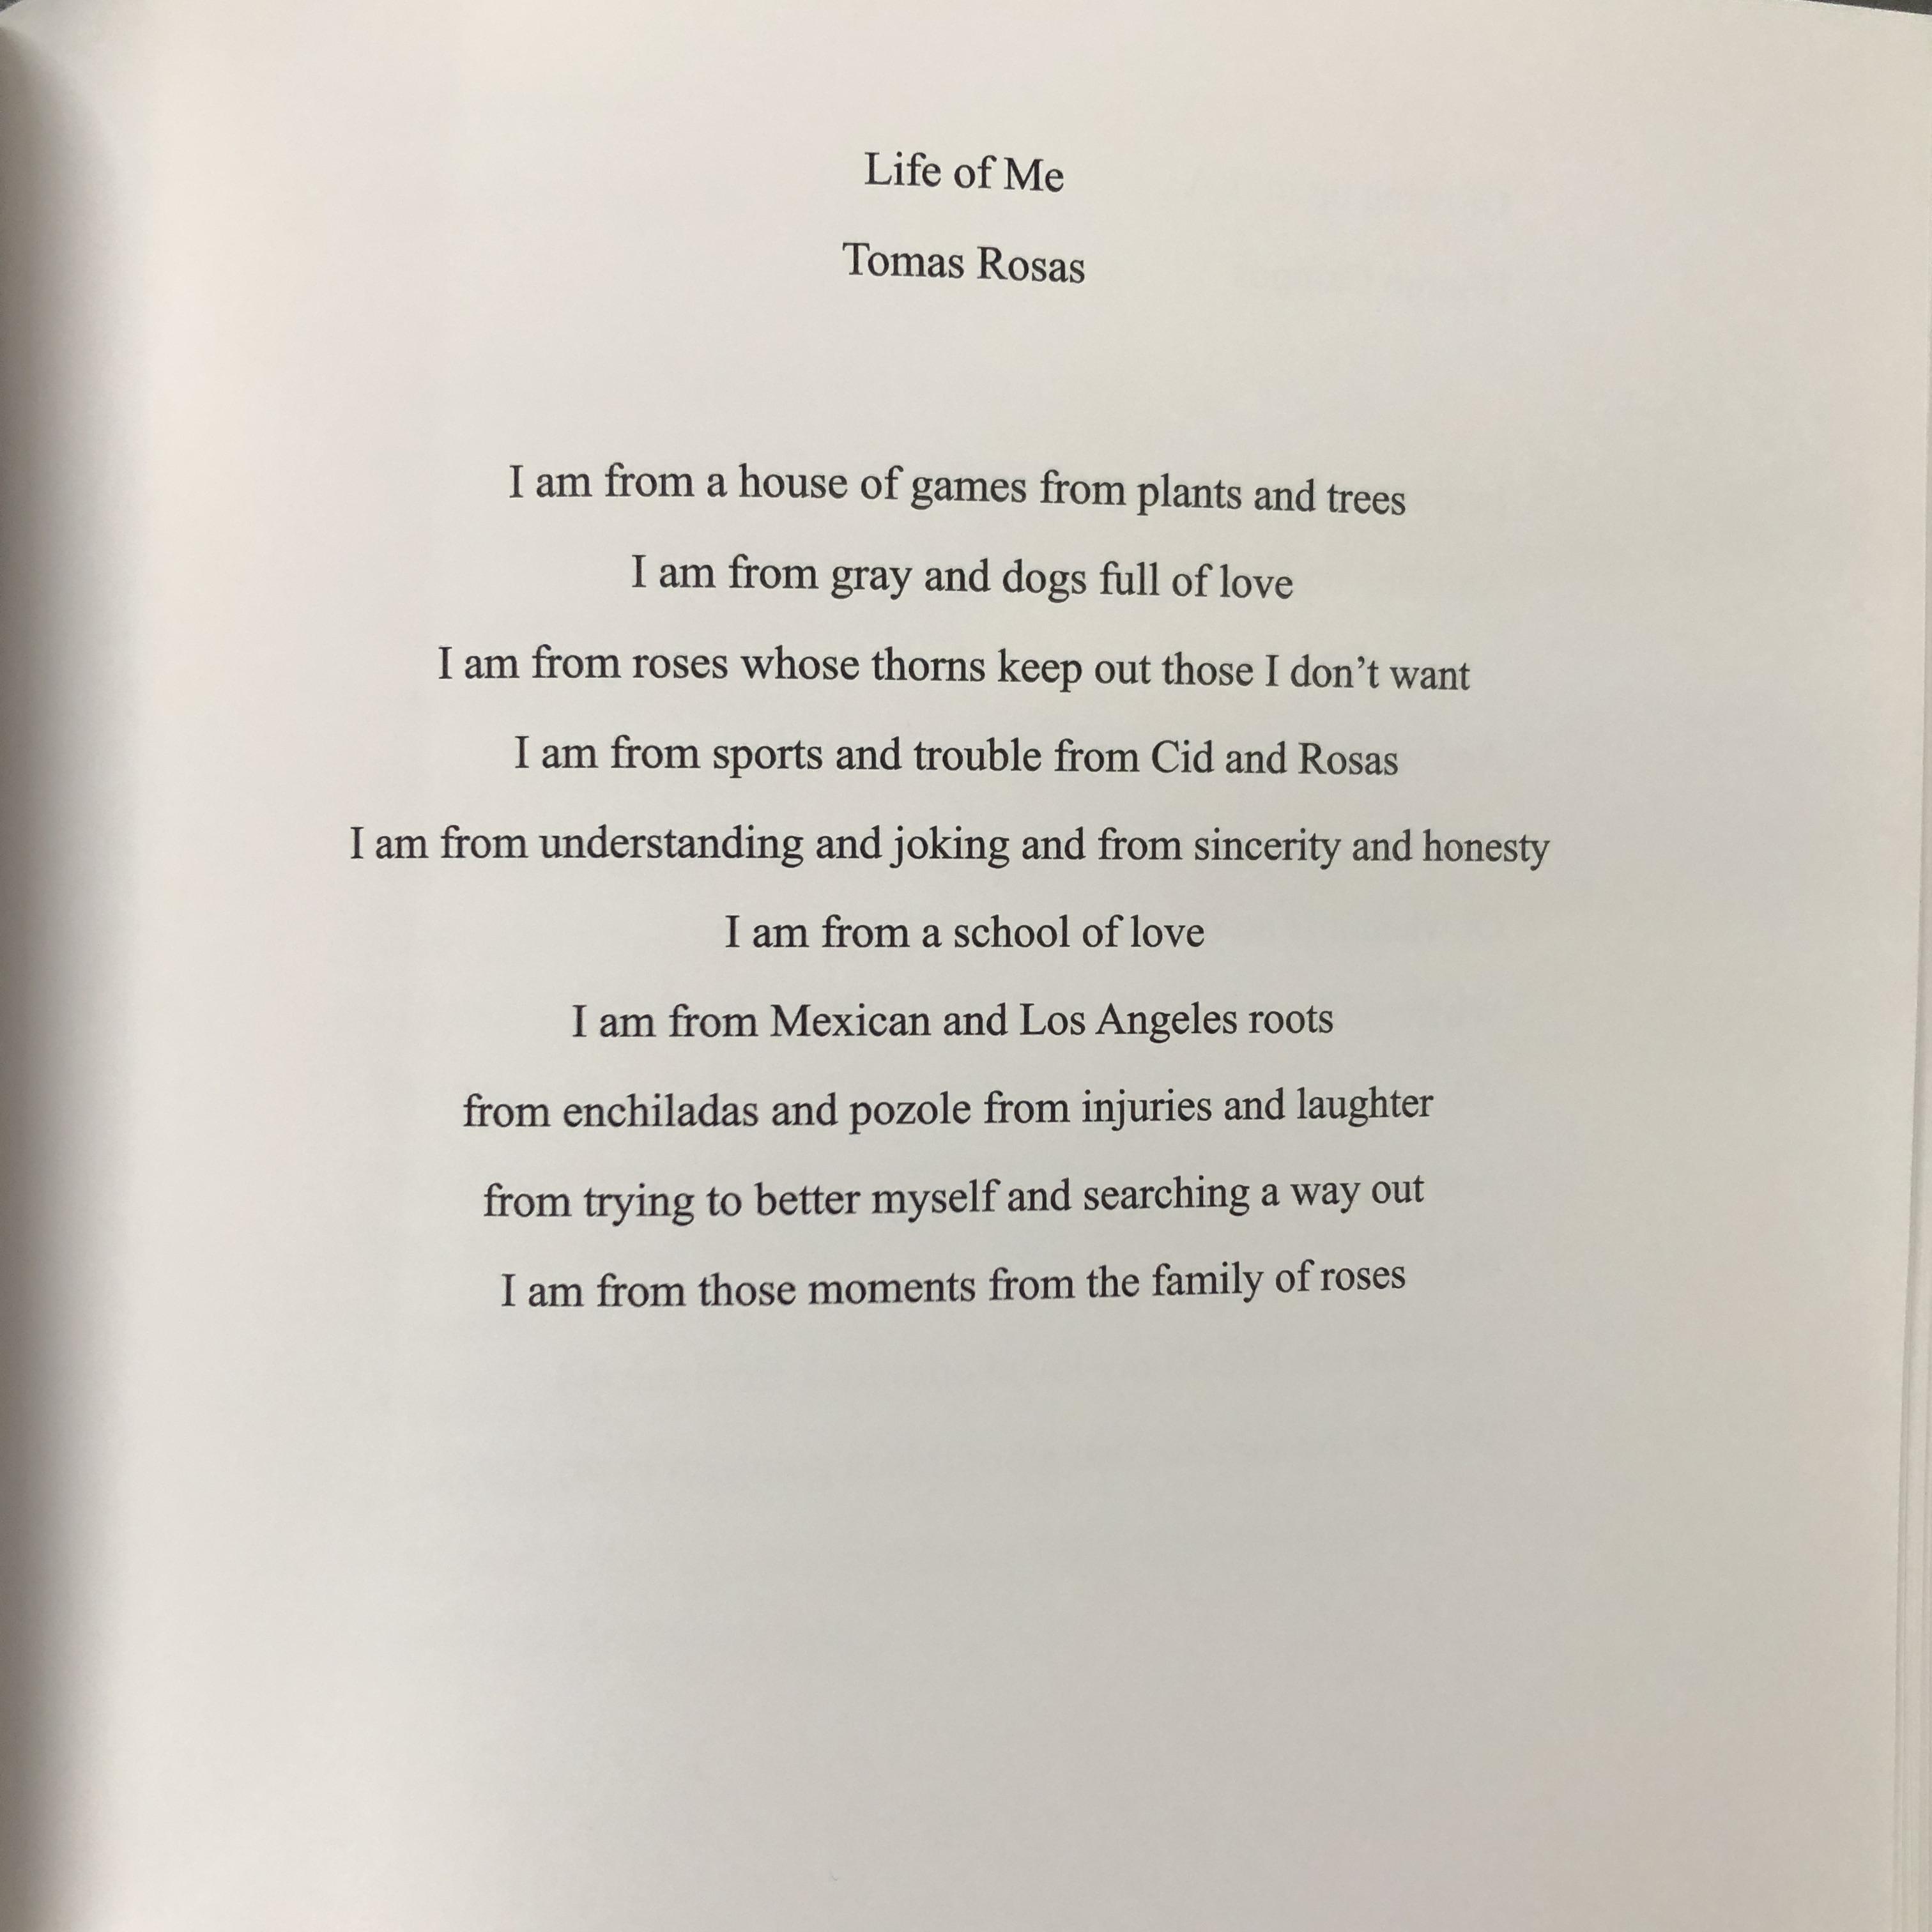 a piece of student writing titled "Life of Me" by Tomas Rosas